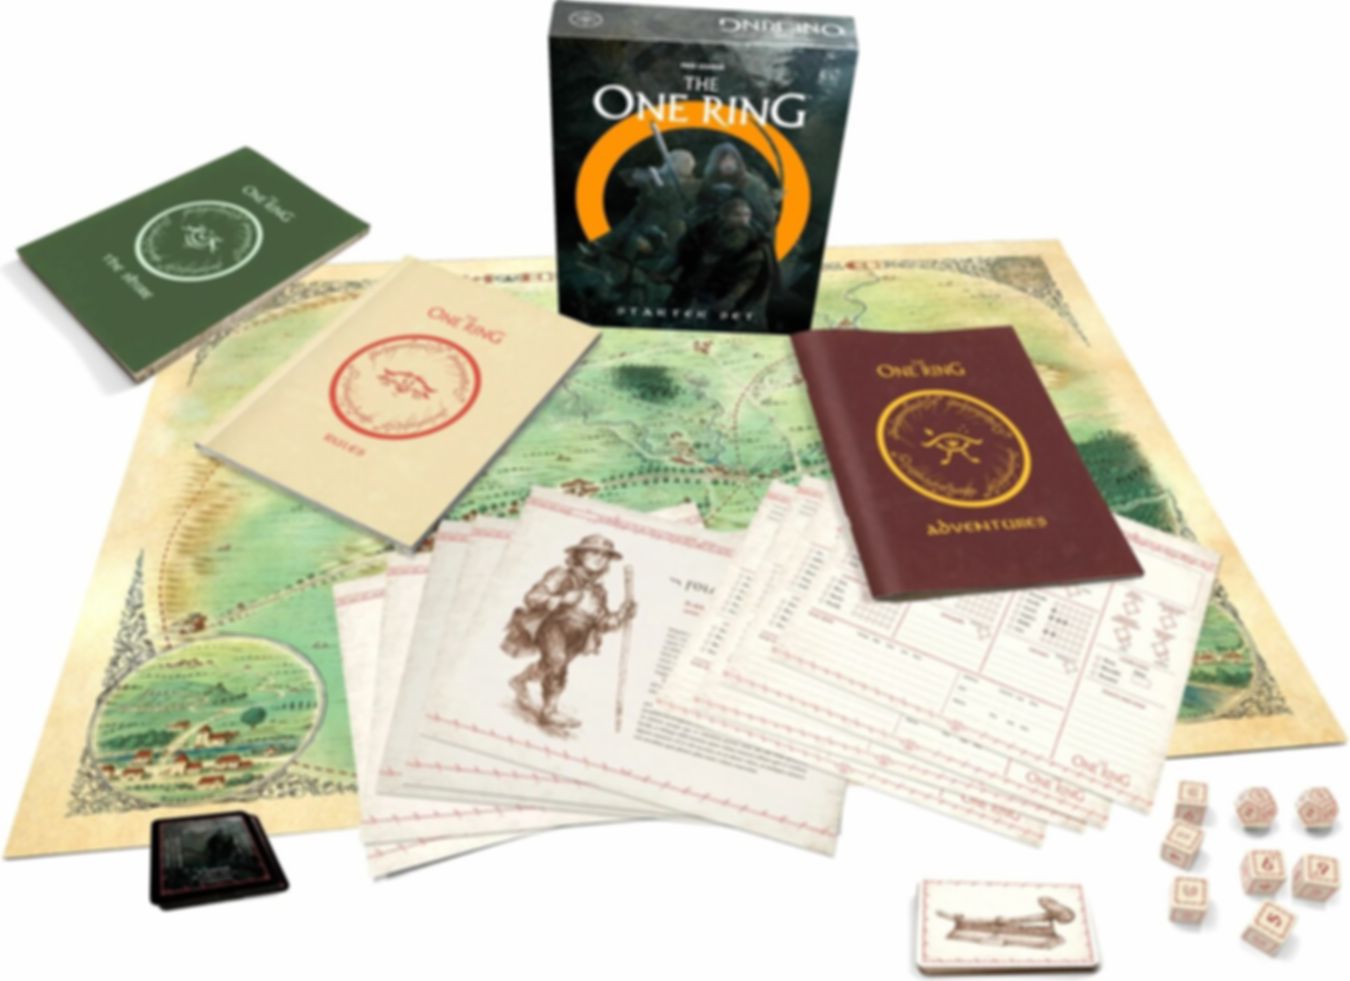 The One Ring Starter Set components